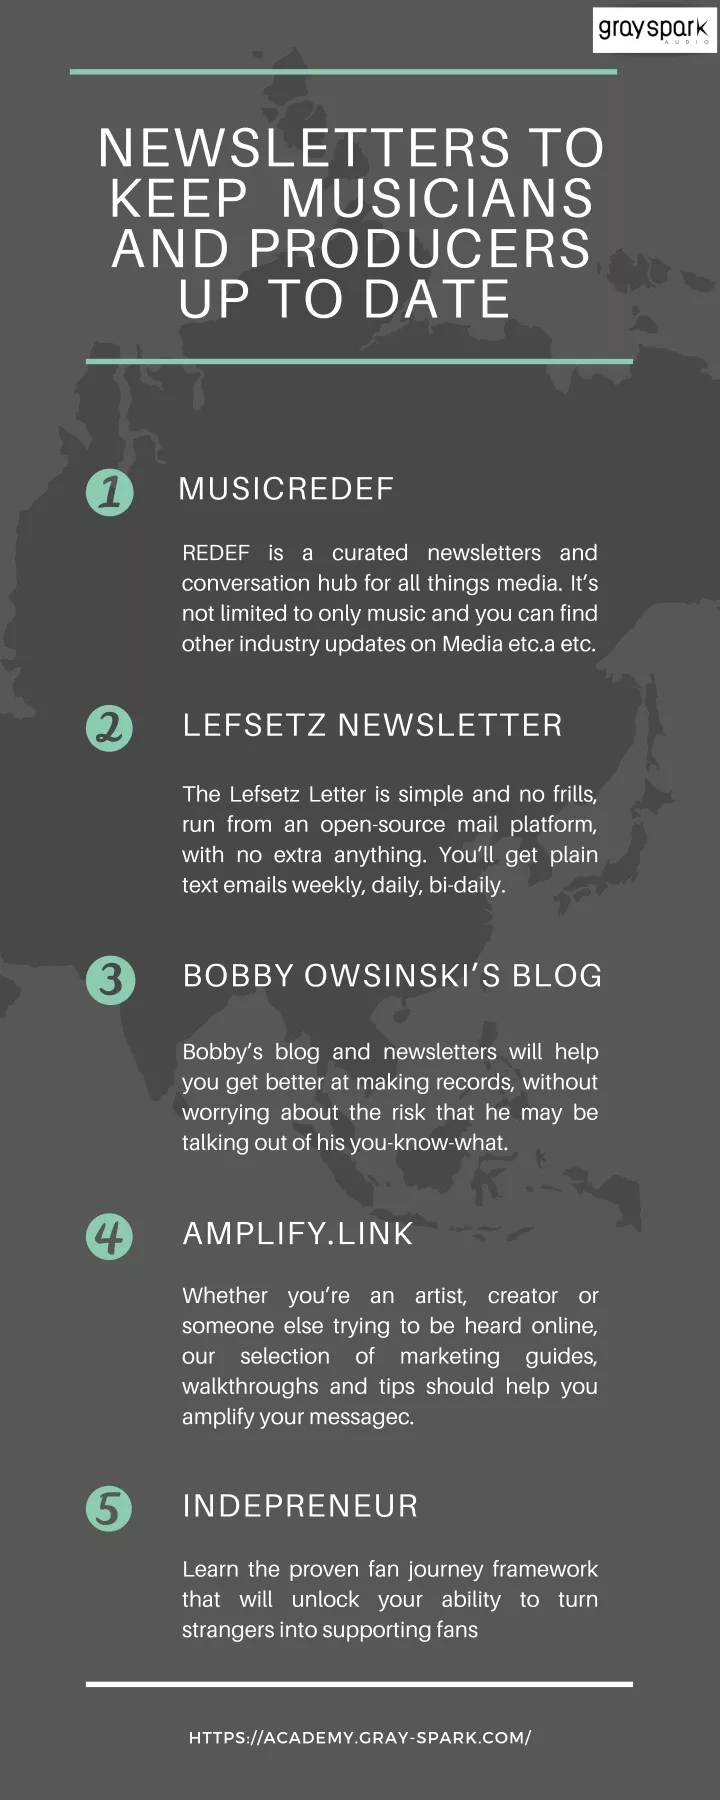 newsletters to keep musicians and producers